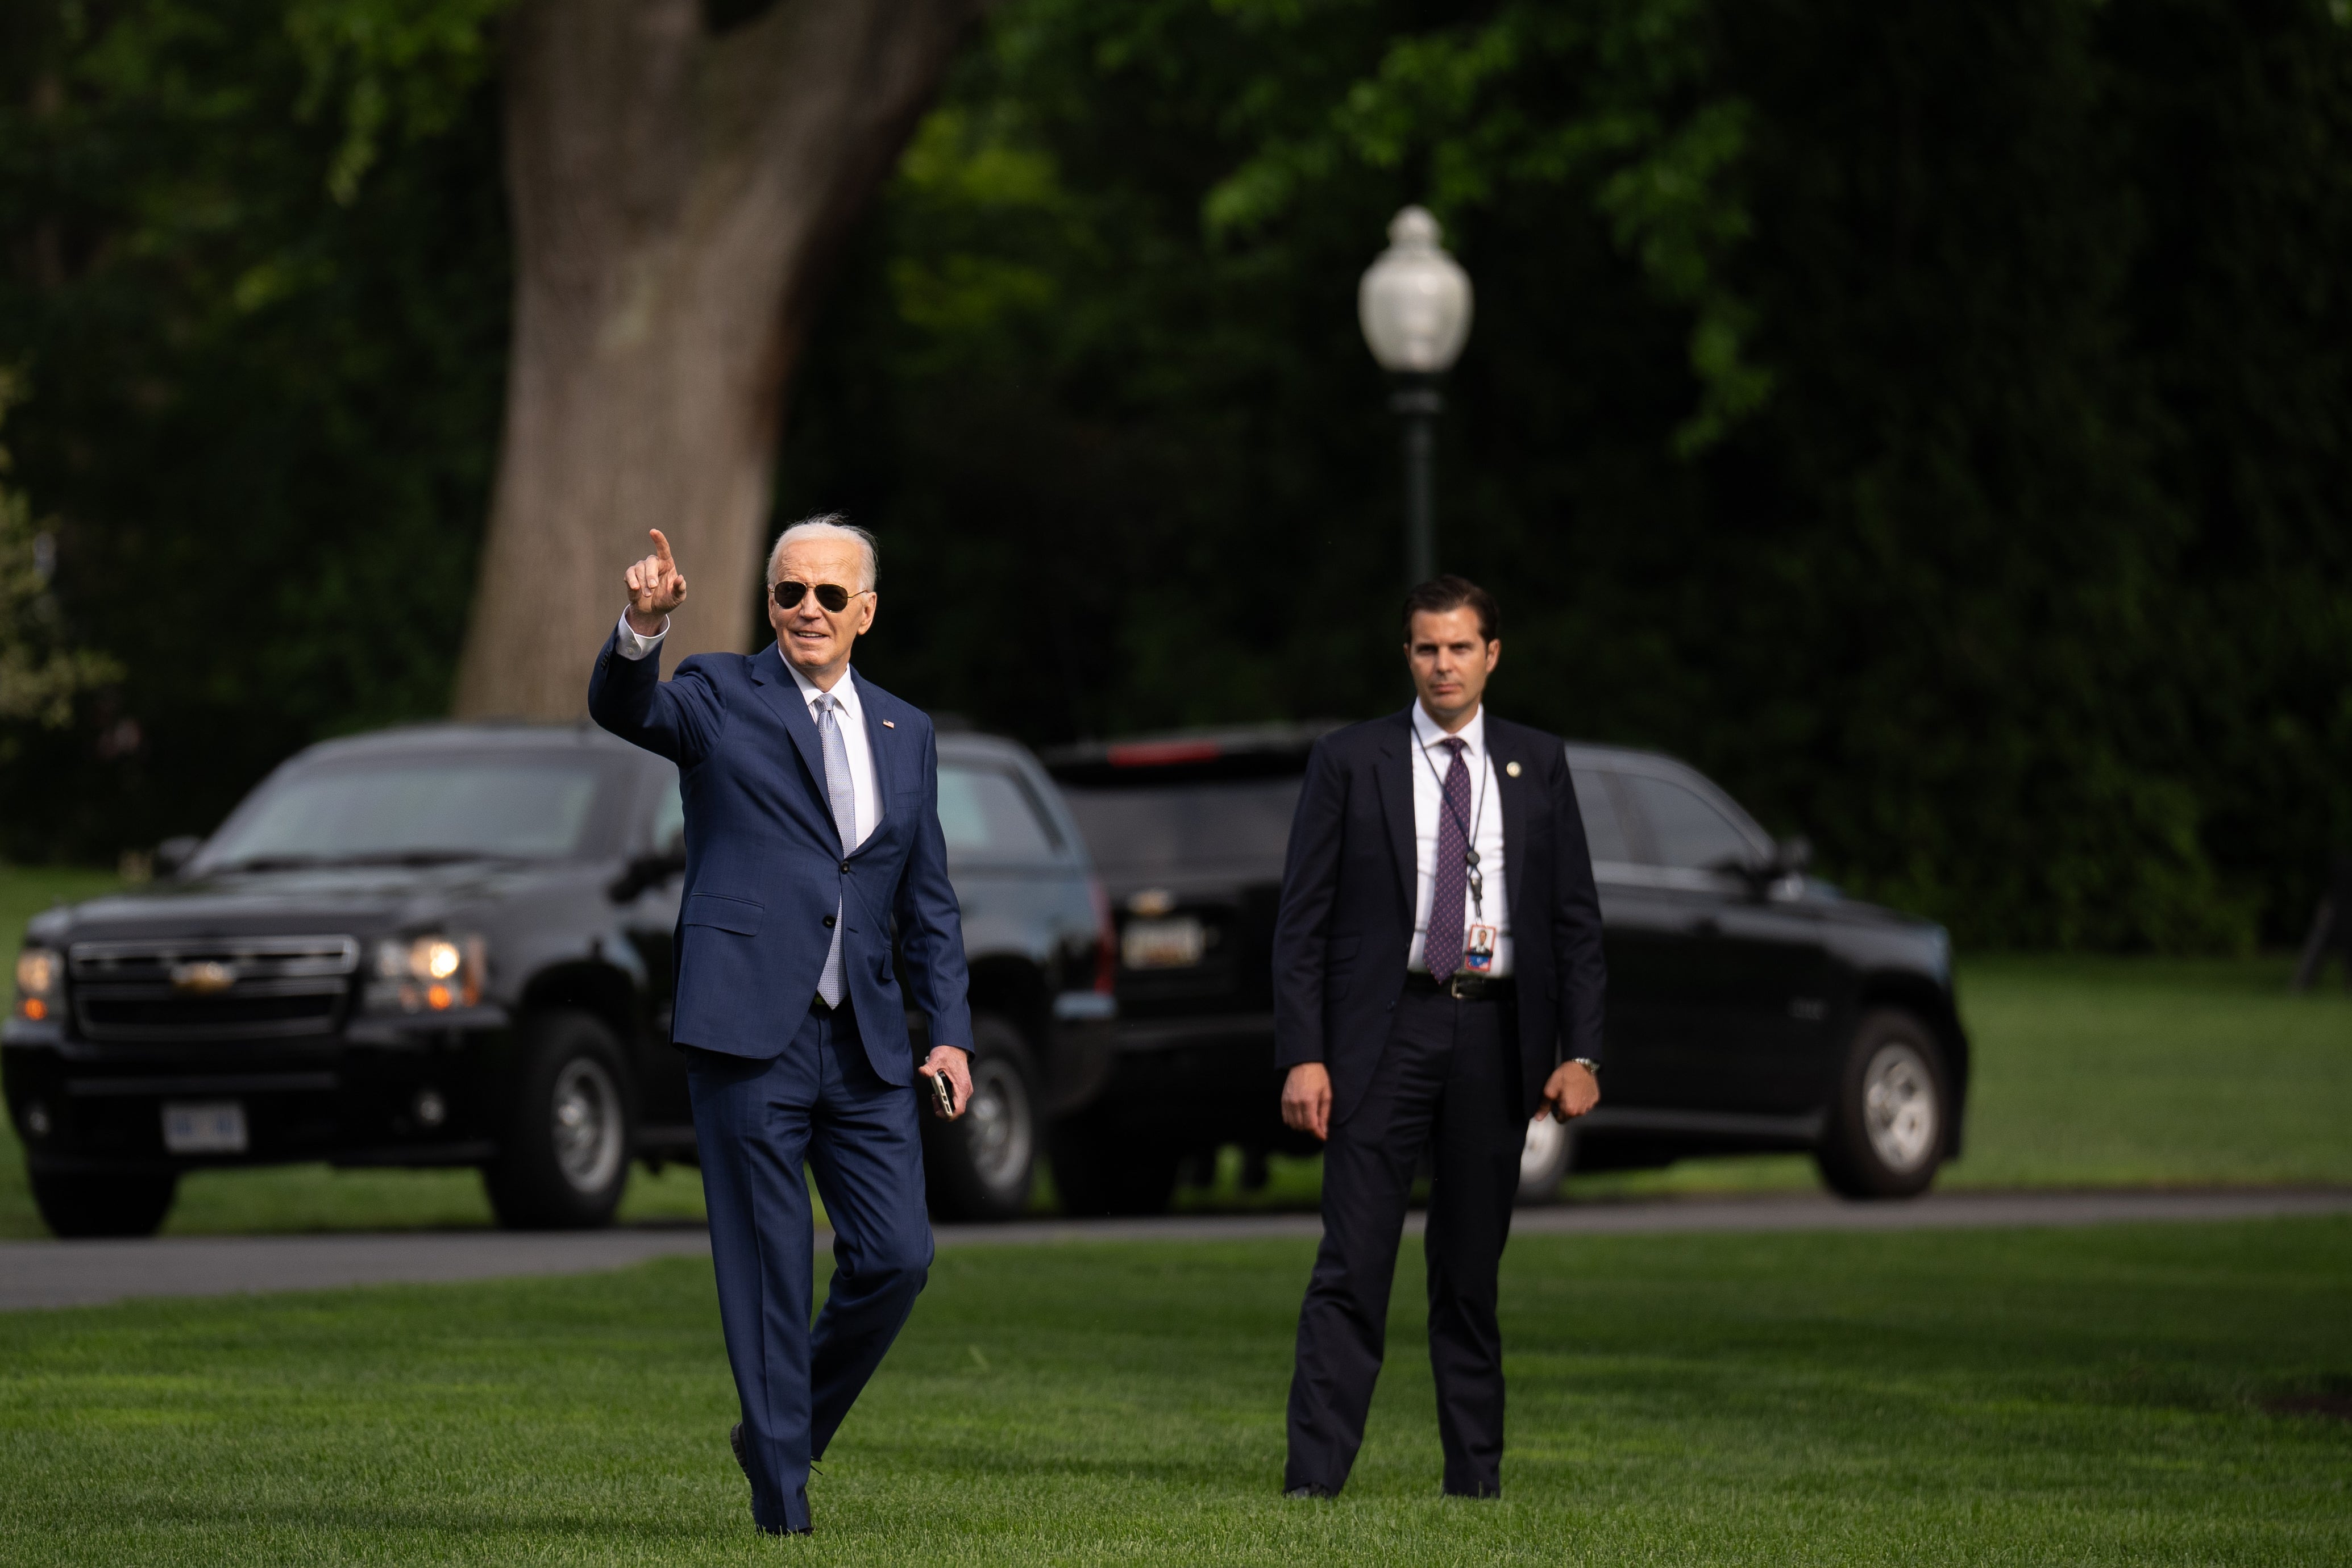 WASHINGTON, DC - MAY 9: U.S. President Joe Biden seems not to be swearing the low poll numbers. (Photo by Andrew Harnik/Getty Images)